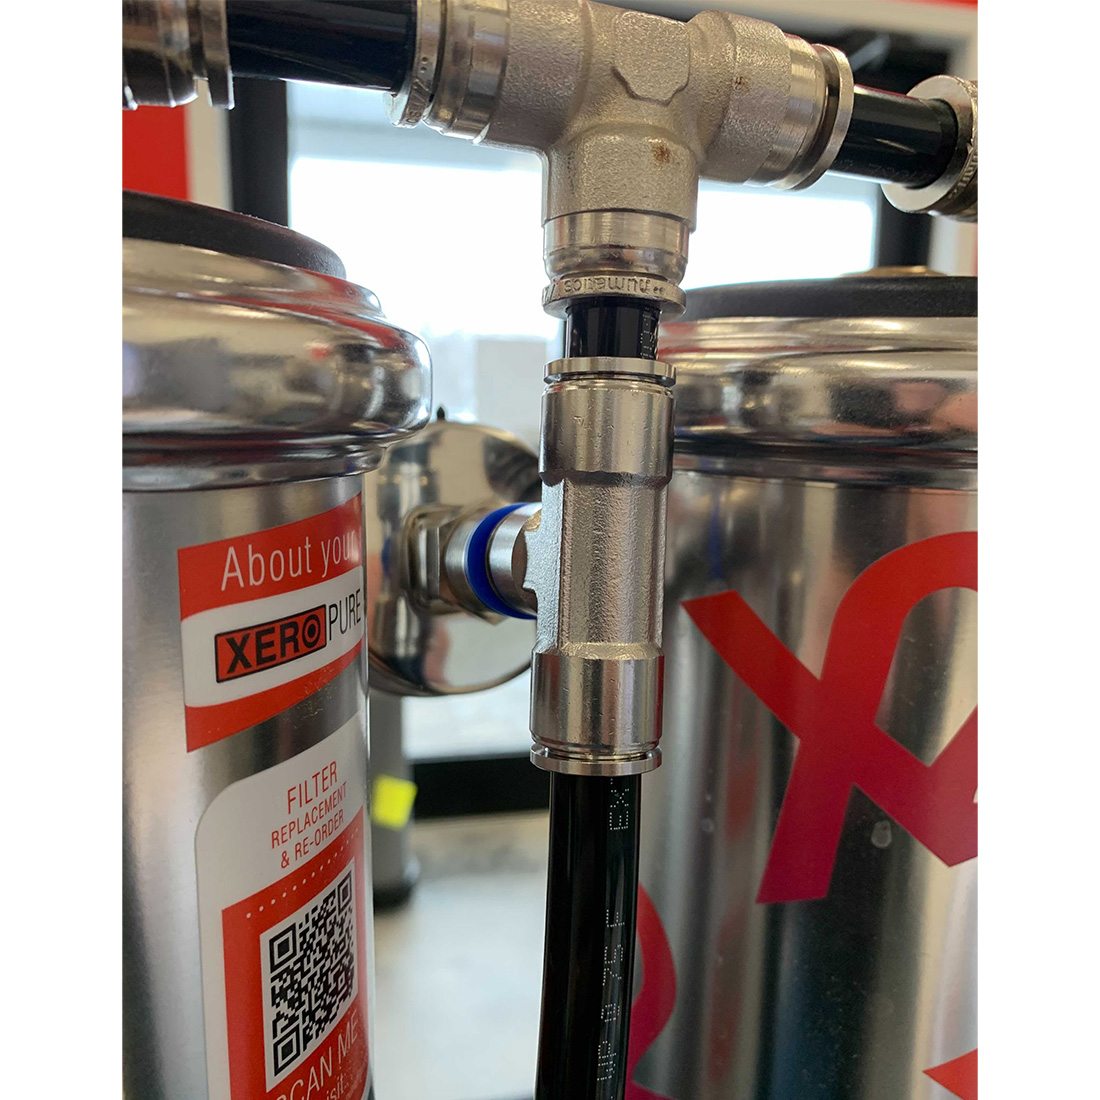 XERO Pressure Gauge Assembly - In Action Connected to Two RO Membranes View